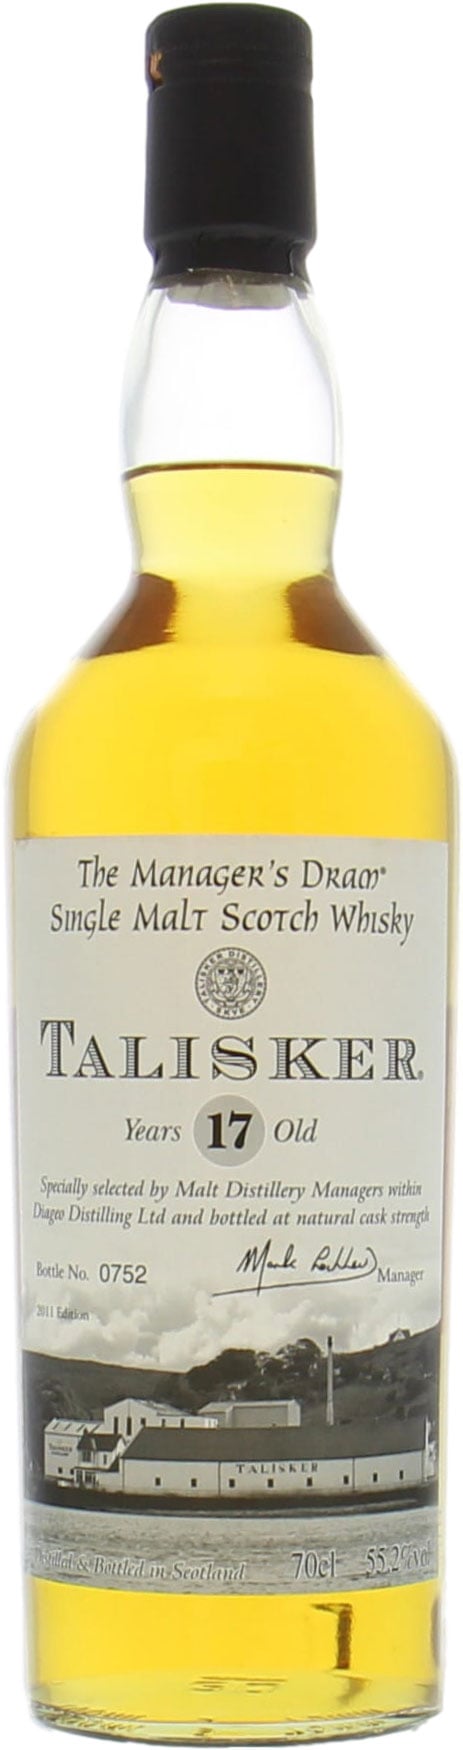 Talisker - 17 Years Old The Manager's Dram 55.2% NV Perfect